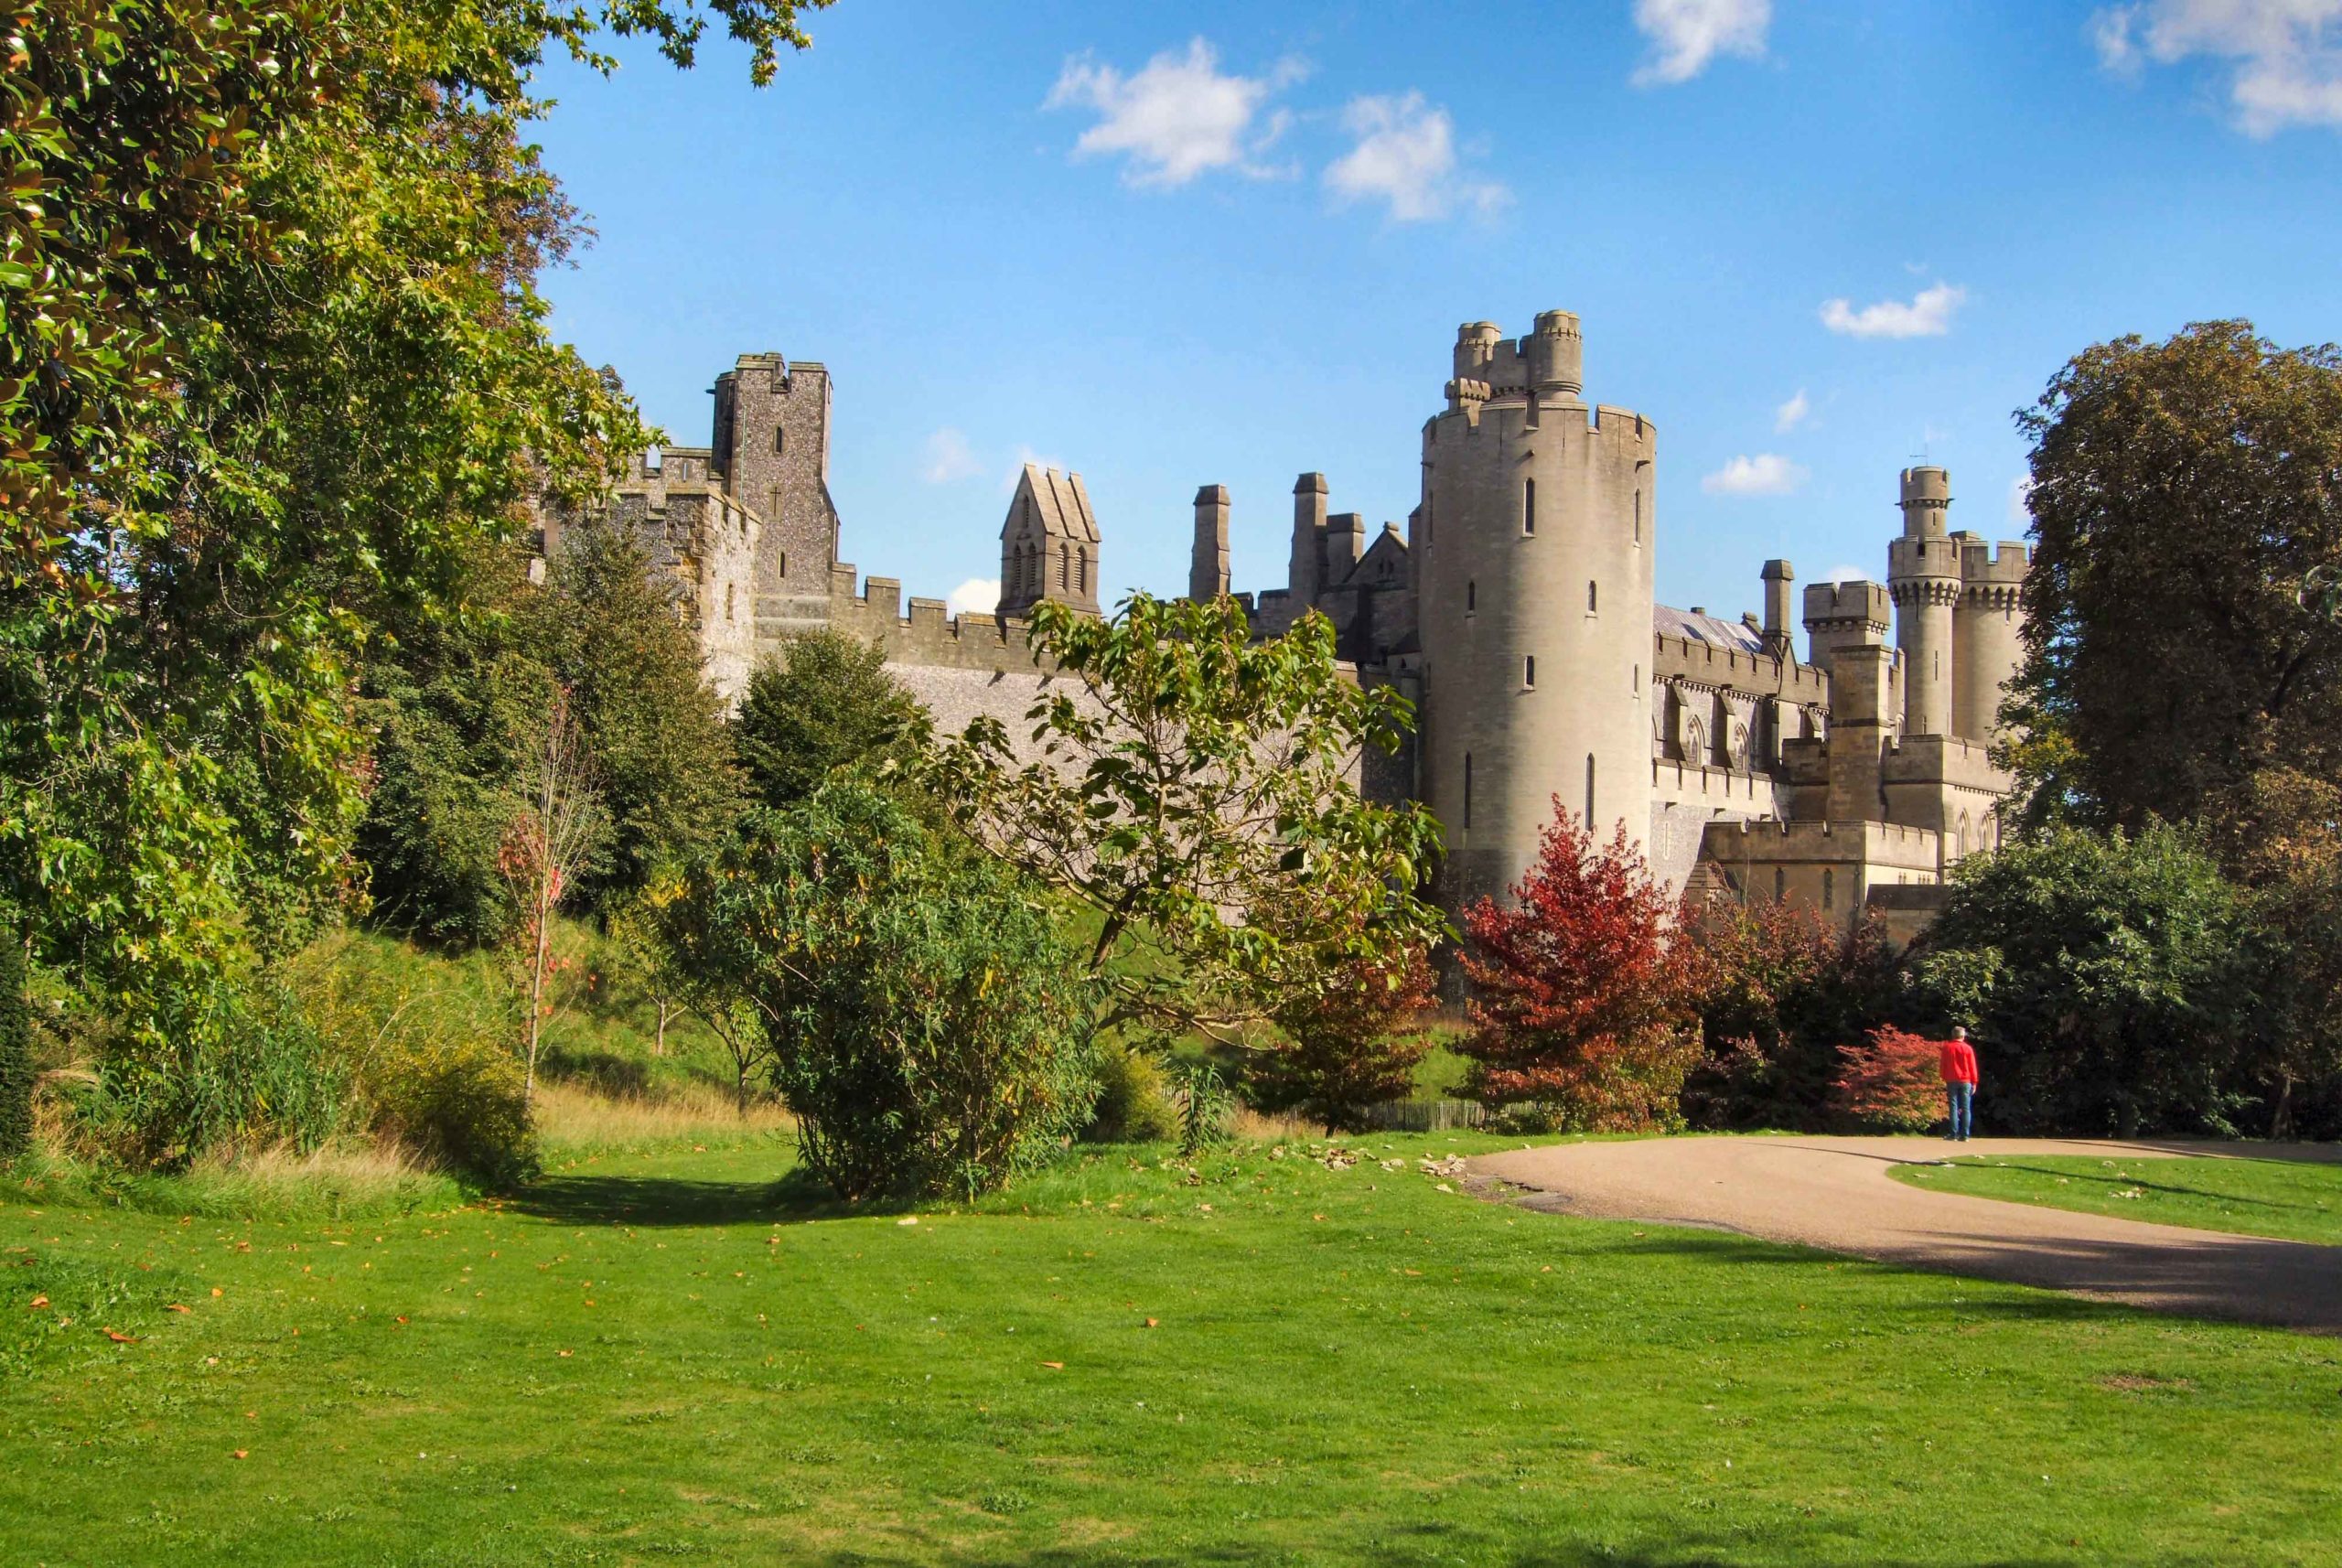 Le château d'Arundel © Paul Gillett - licence [CC BY-SA 2.0] from Wikimedia Commons